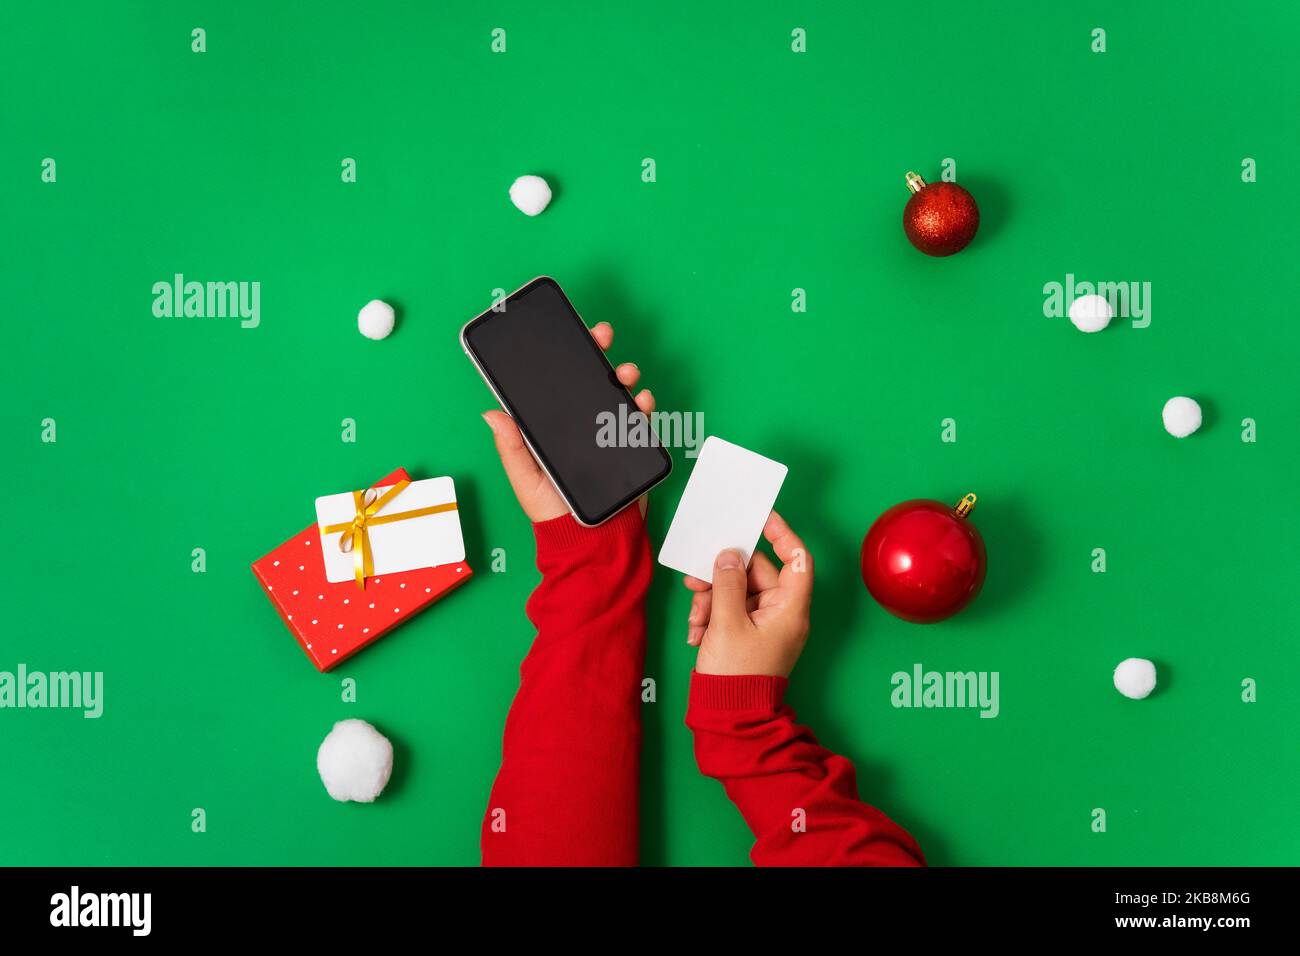 Female hands hold a smartphone and a bank card on a green background, Christmas decor and gifts. Flat lay, minimal Concept of online payment online sh Stock Photo